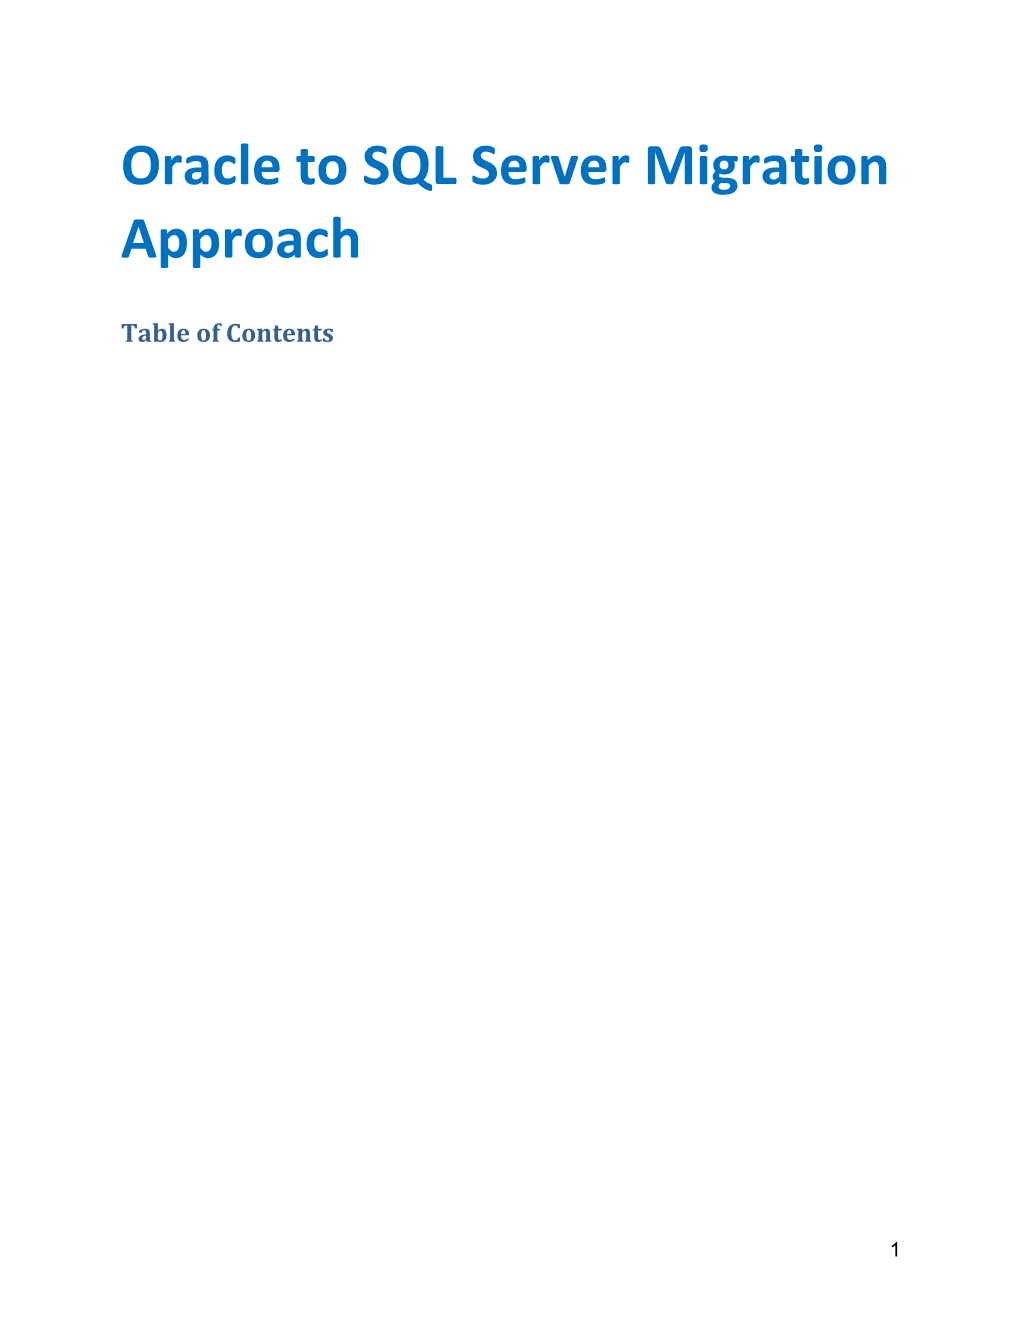 Oracle to SQL Server Migration Approach